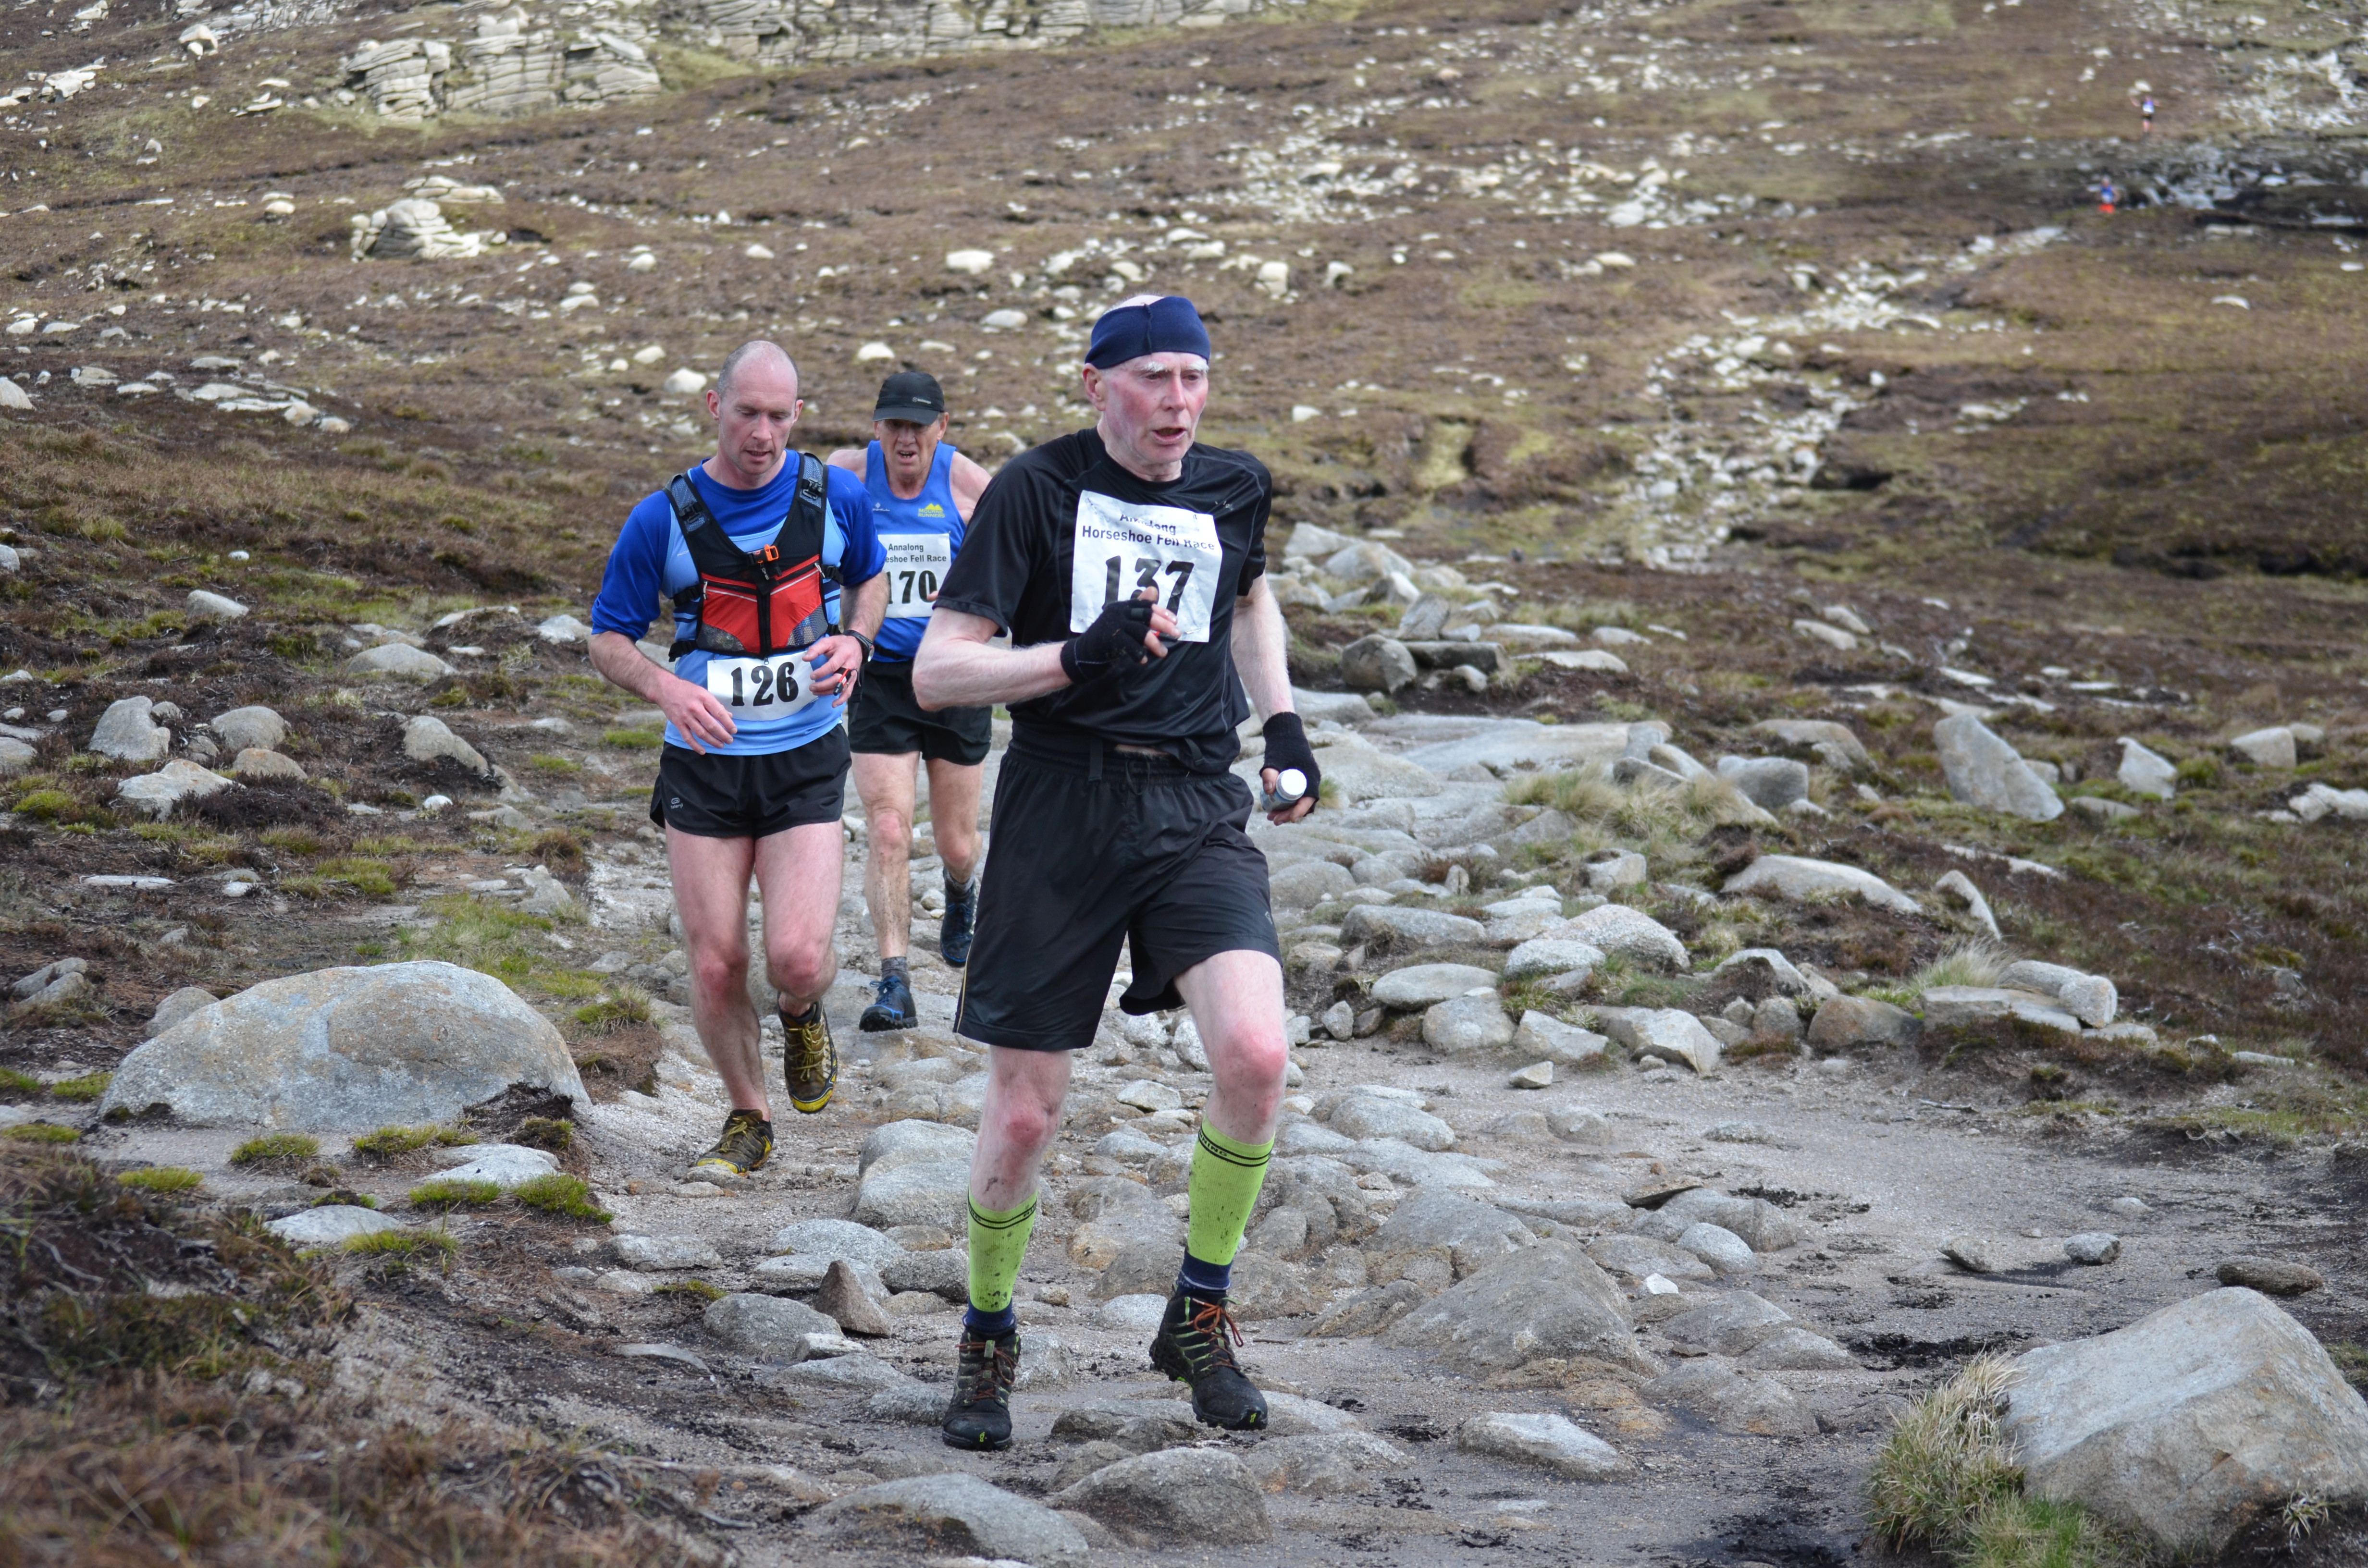 The race for first vet hots up with Jim Patterson (front) beating Stewart Cunningham (back)